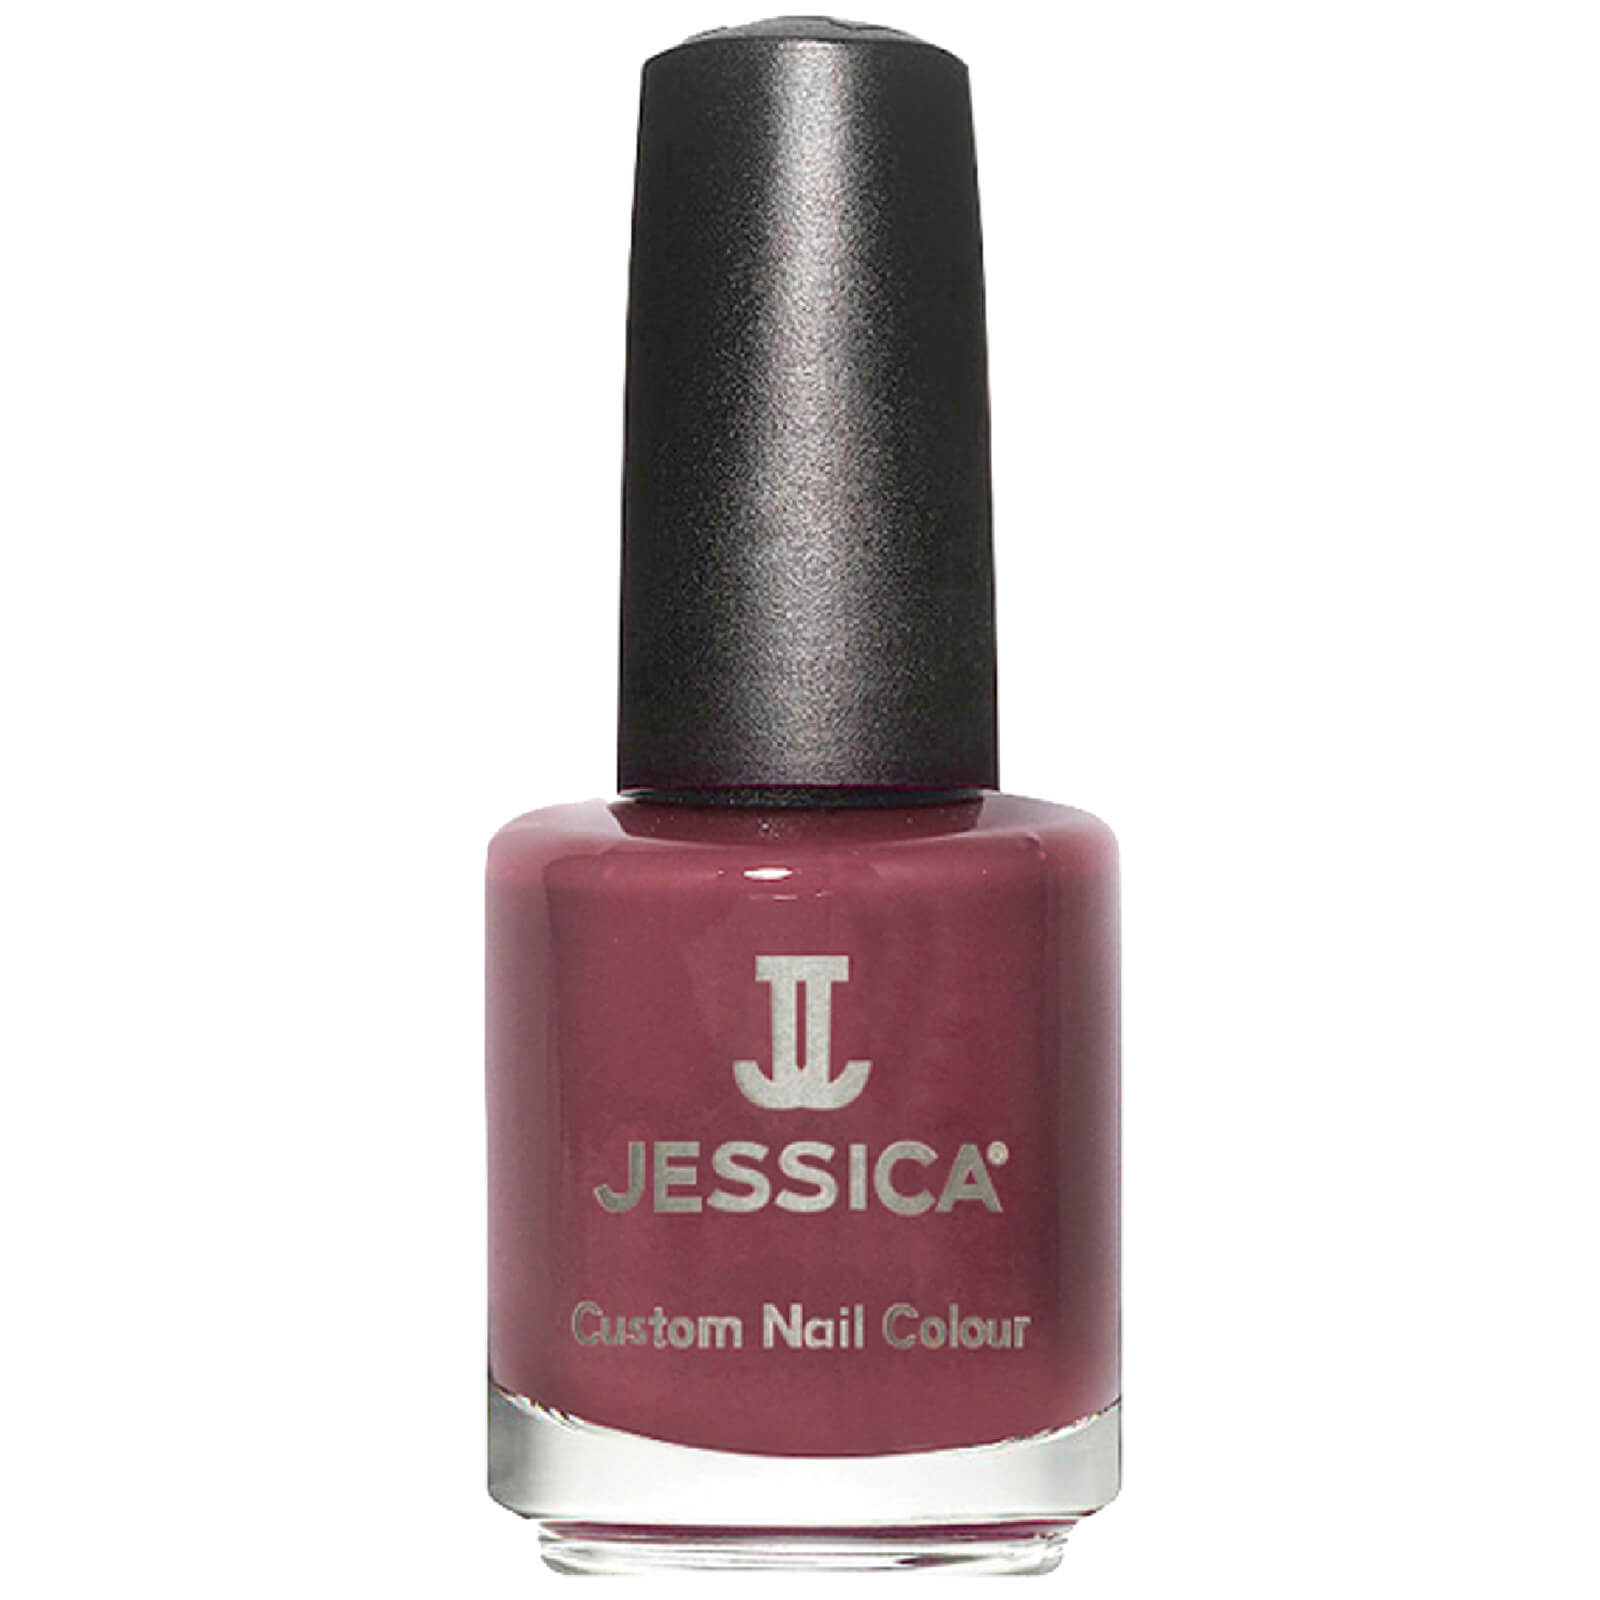 Image of Jessica Custom Colour Nail Varnish - Enter If You Dare